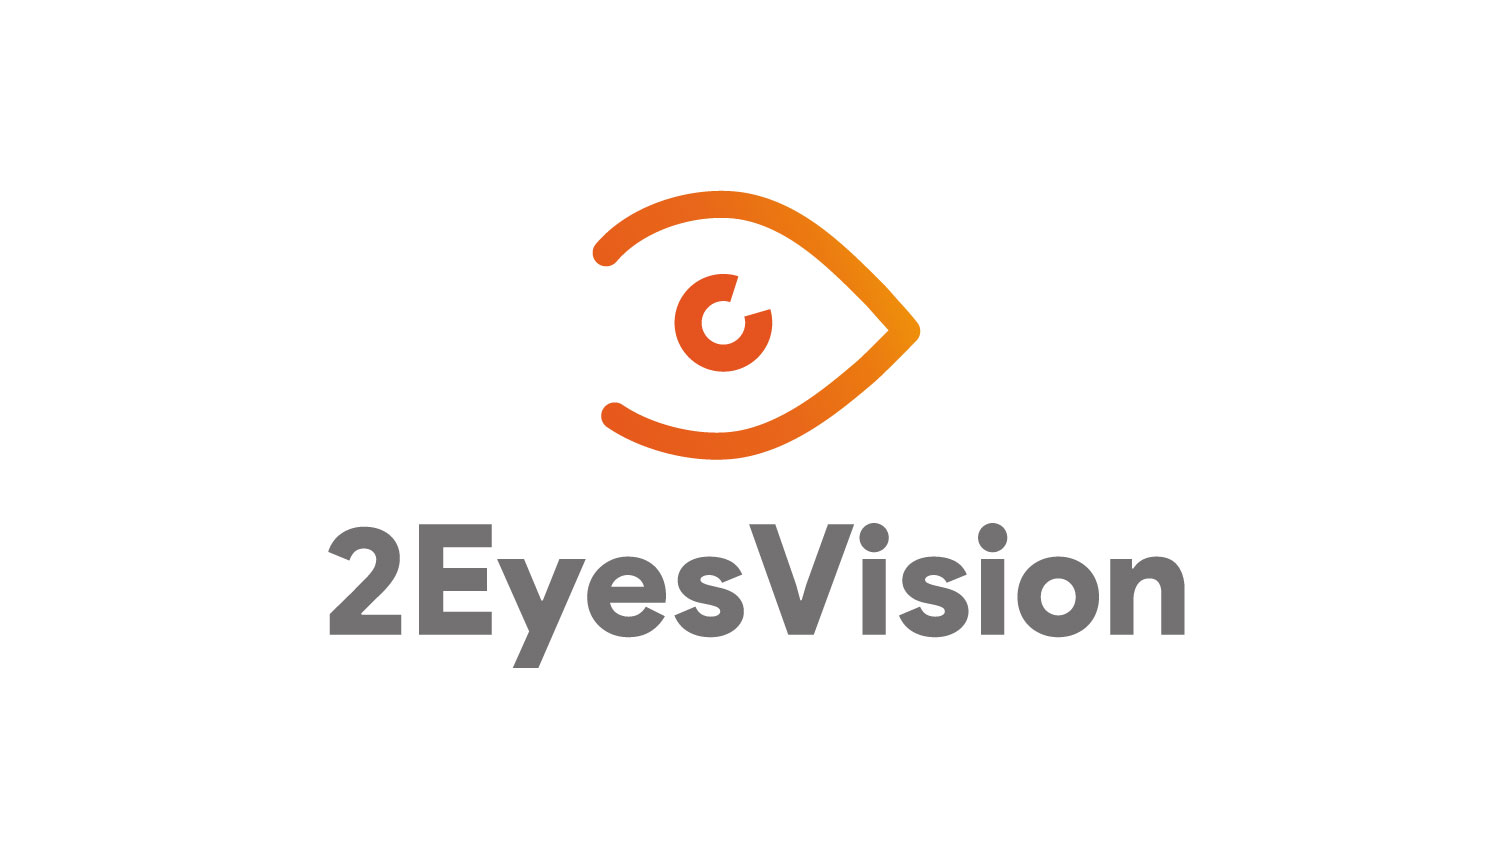 2EyesVision refreshes logo while preserving brand essence